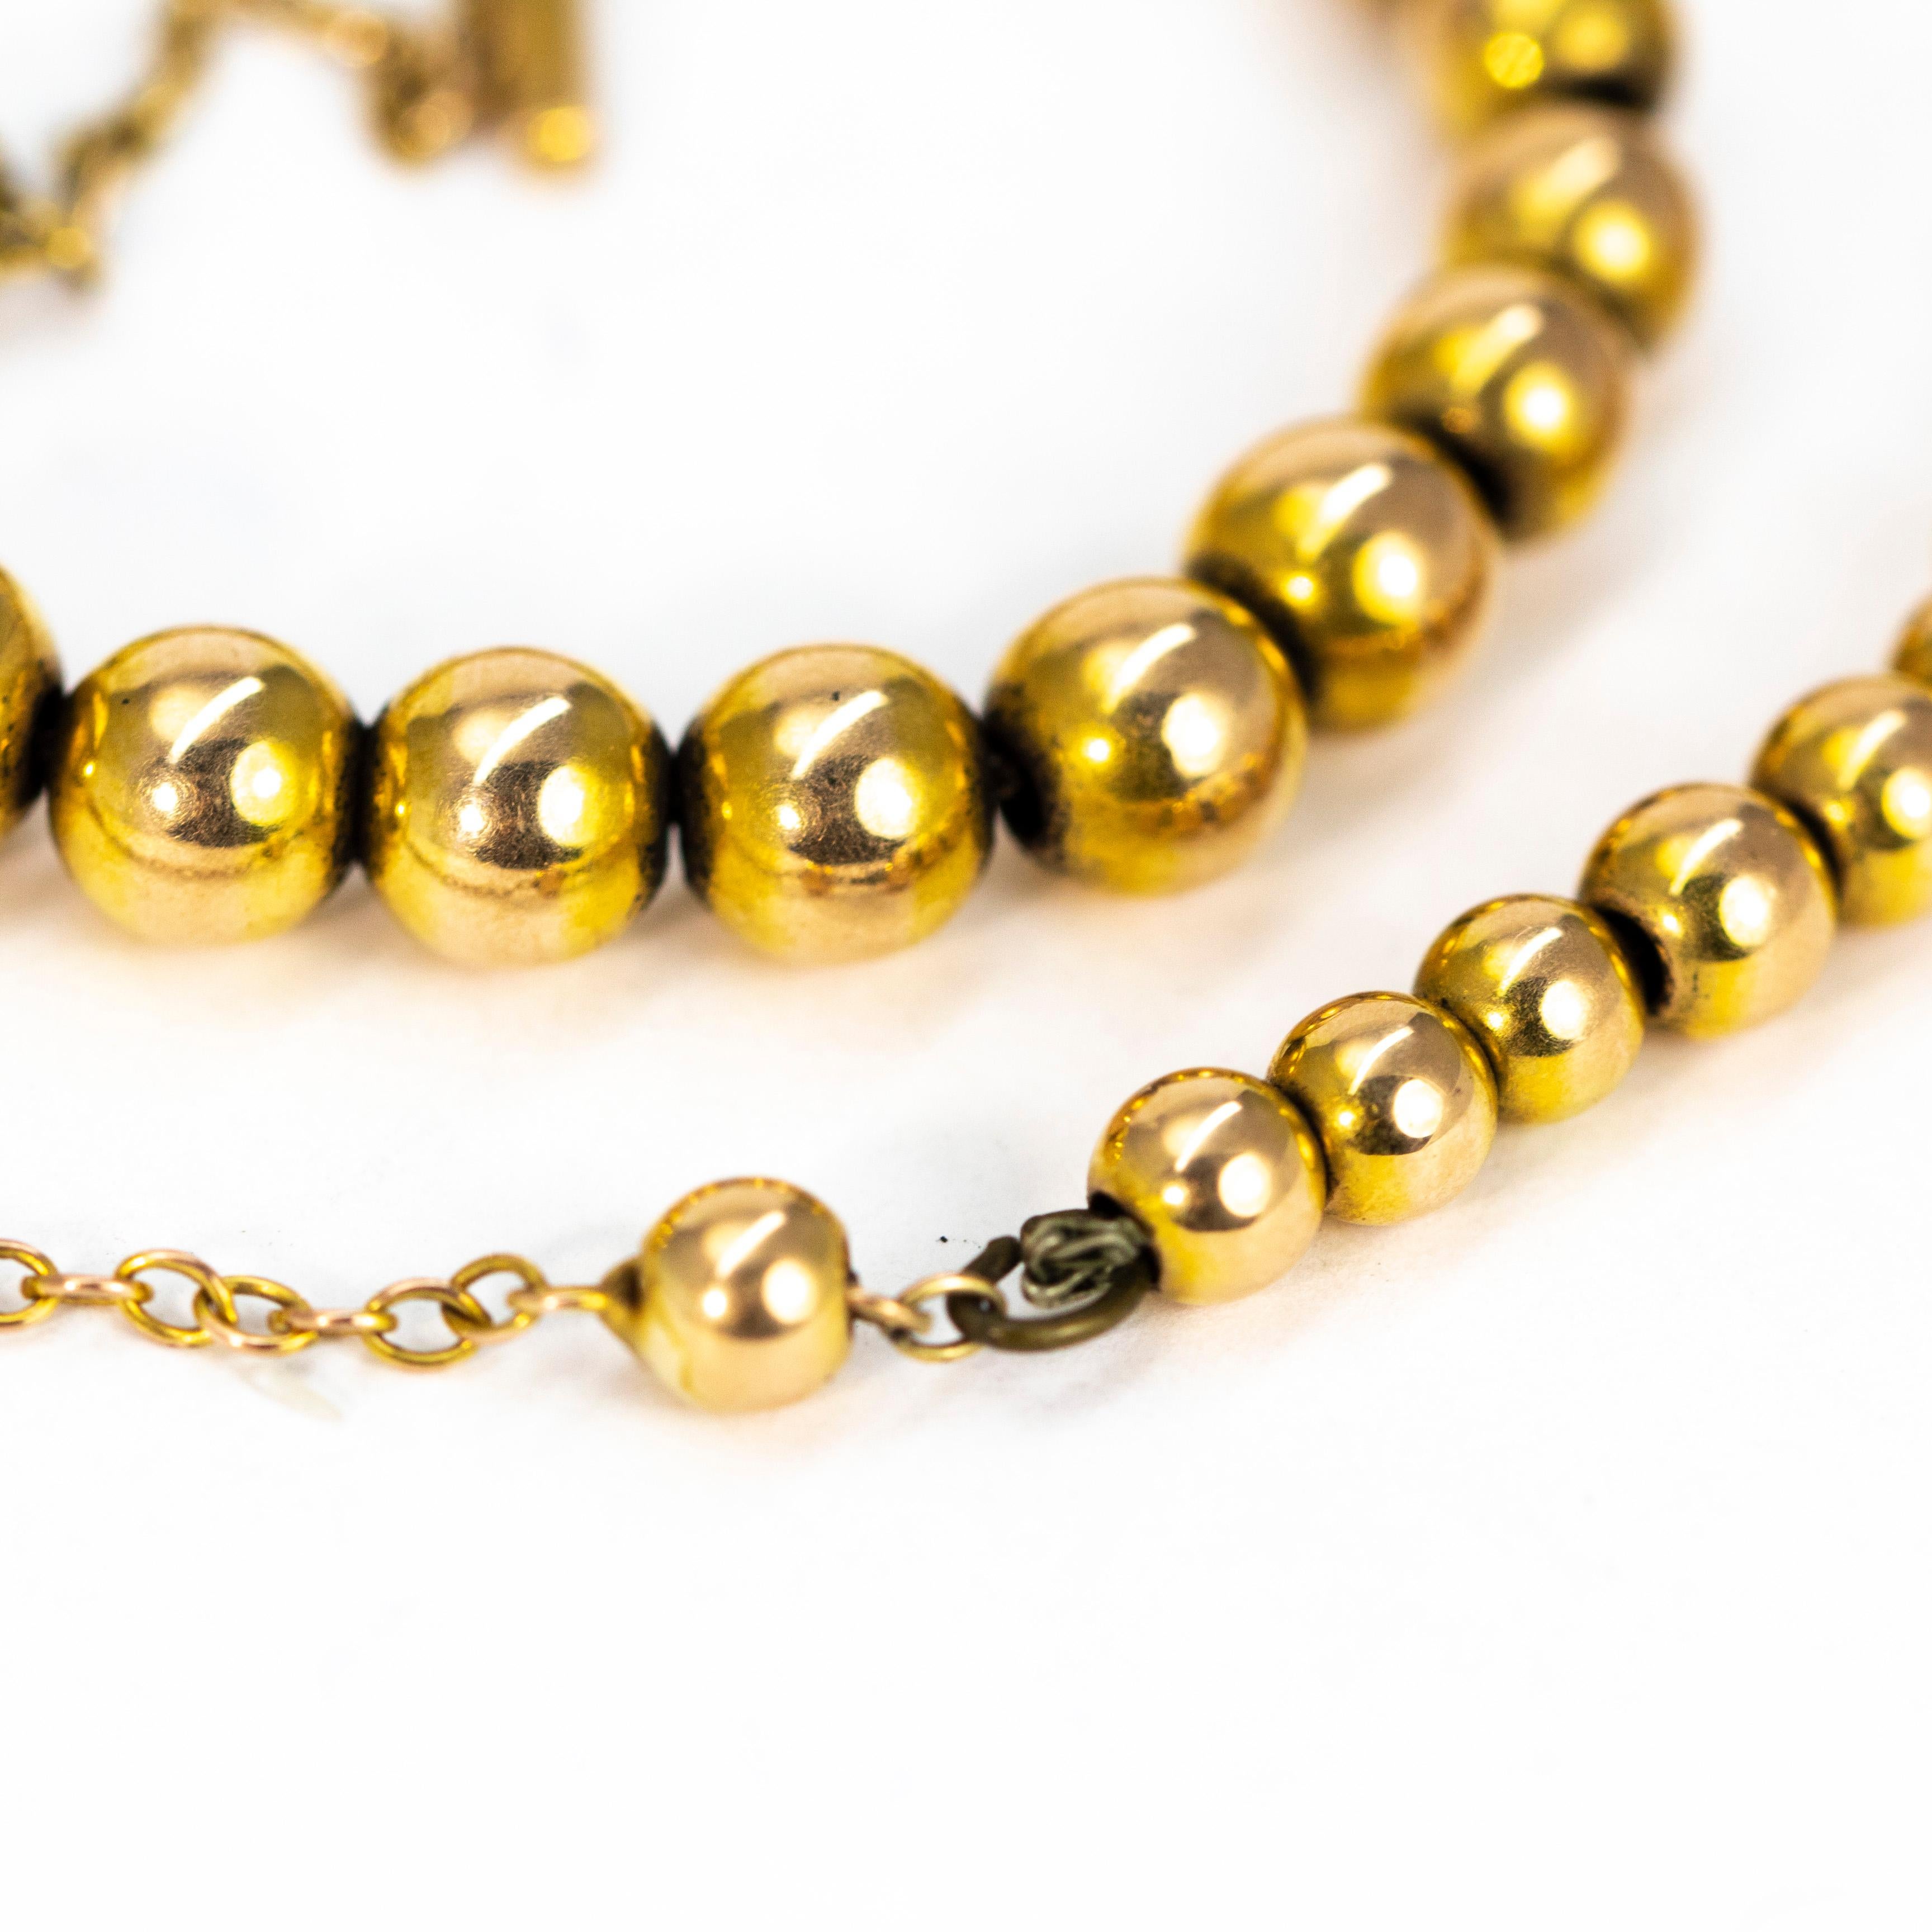 The glossy 15ct gold beads on this necklace slightly graduated in size staring from the largest at the centre and the smallest at the outer edges which then lead into a chain. The necklace is fastened using a classic barrel fastening. 

Largest Bead